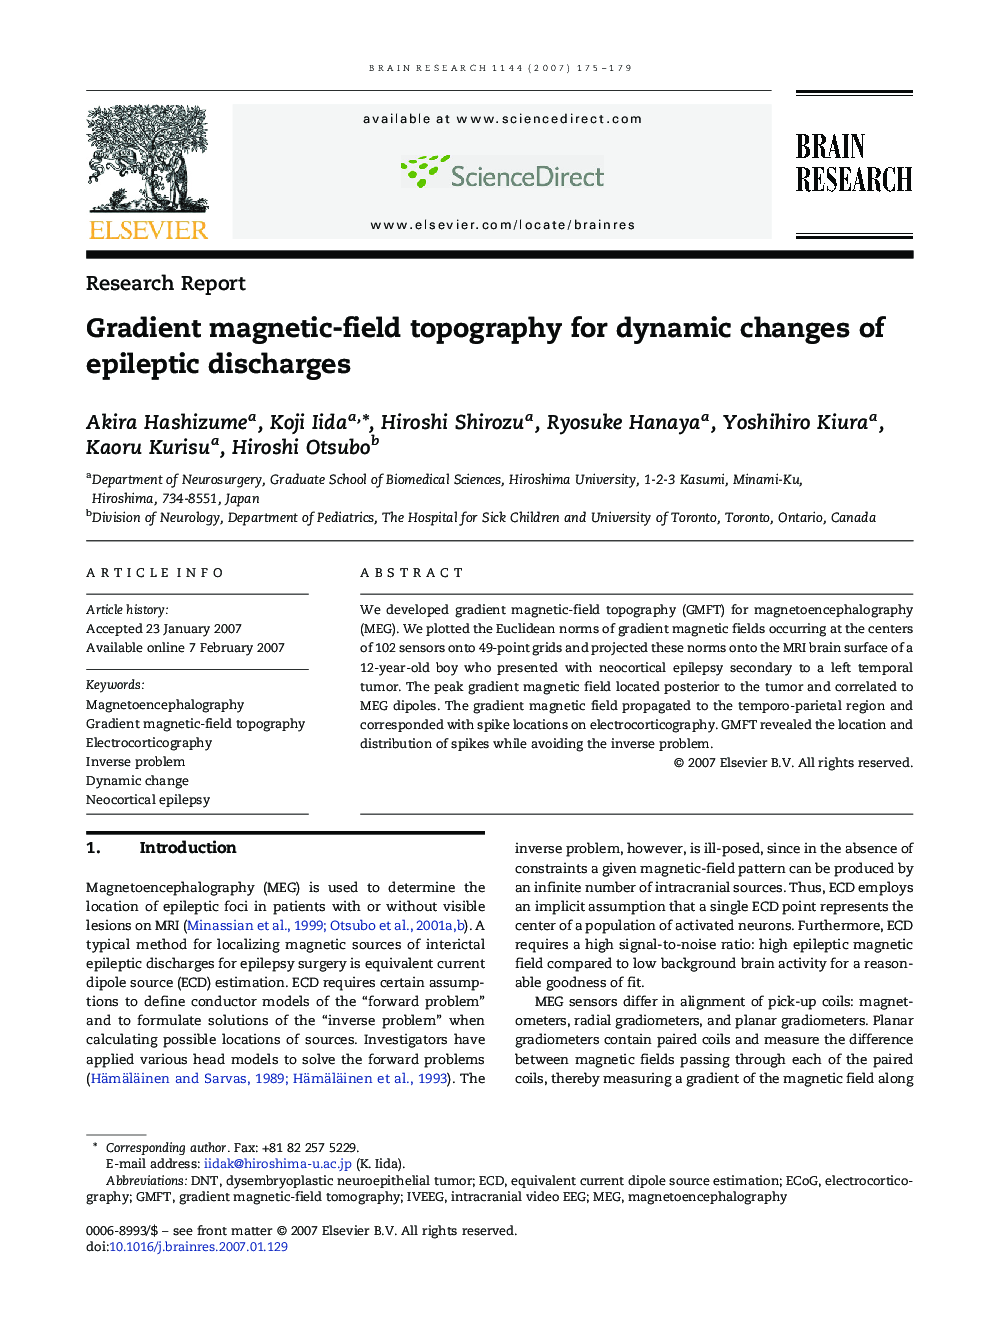 Gradient magnetic-field topography for dynamic changes of epileptic discharges